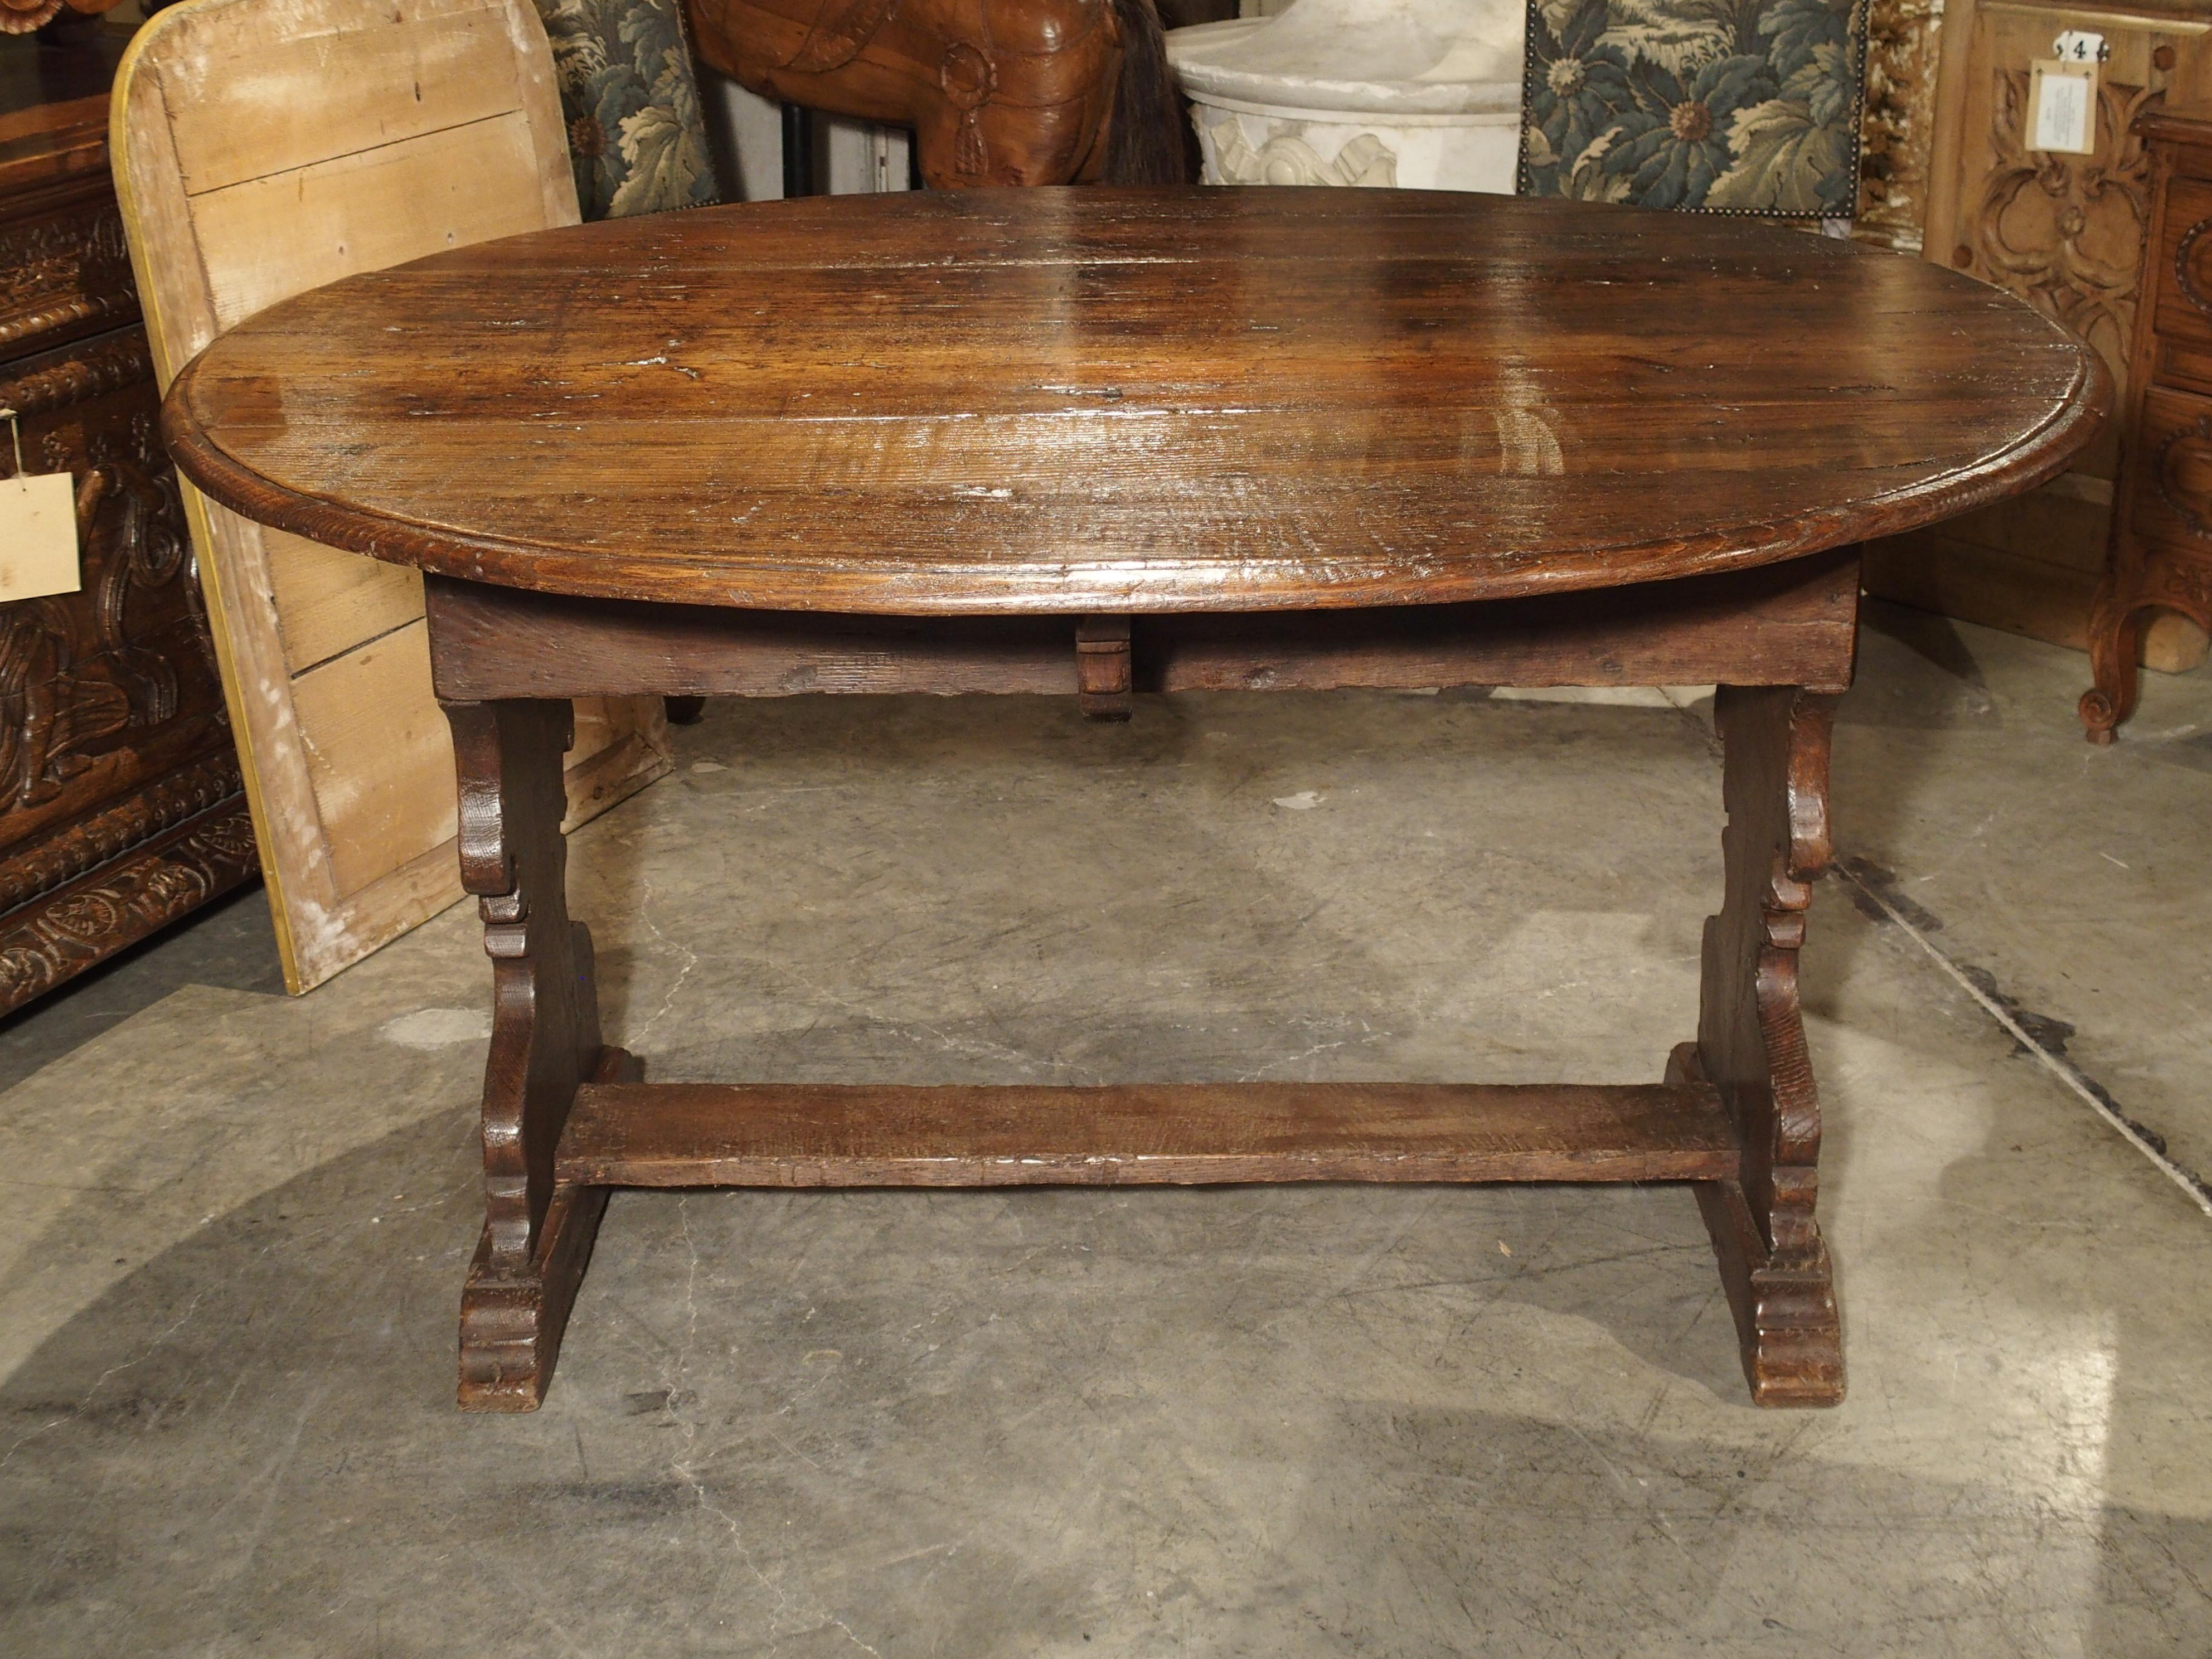 Antique Chestnut Wood Drop Leaf Table from Italy, circa 1790 6